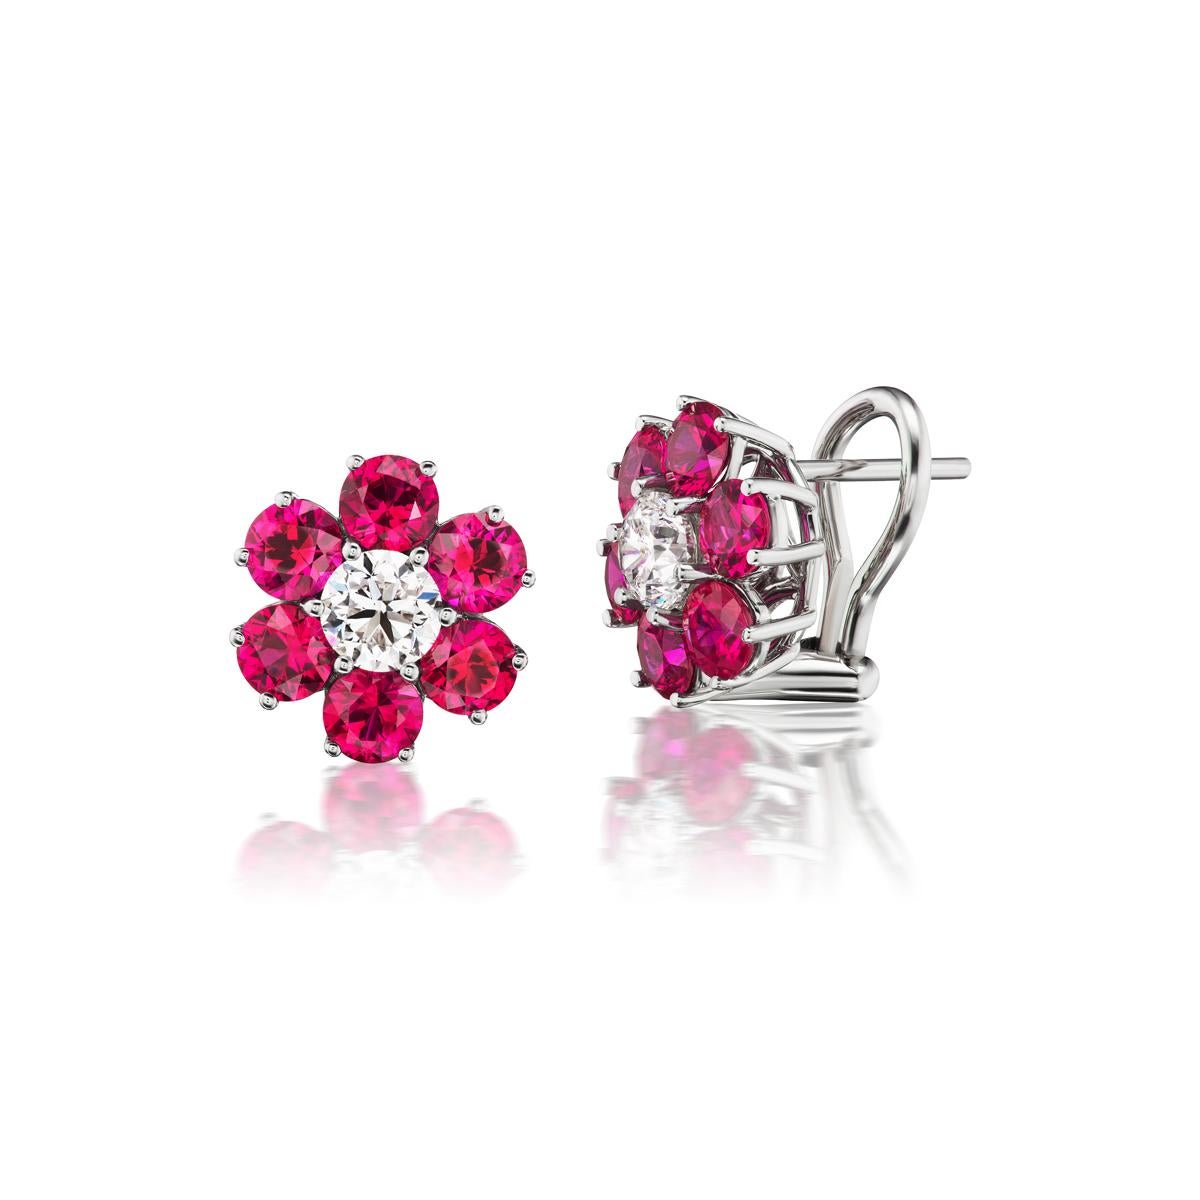 Bright red Burmese Rubies surround glossy white diamonds to form an exquisite floral pattern. These earrings were beautifully set in 18K White Gold

Item #: 04141
Ruby Weight: 3.41 cts. (12 pcs)
Diamond Weight: 1.00 ct
Metal: 18K White Gold